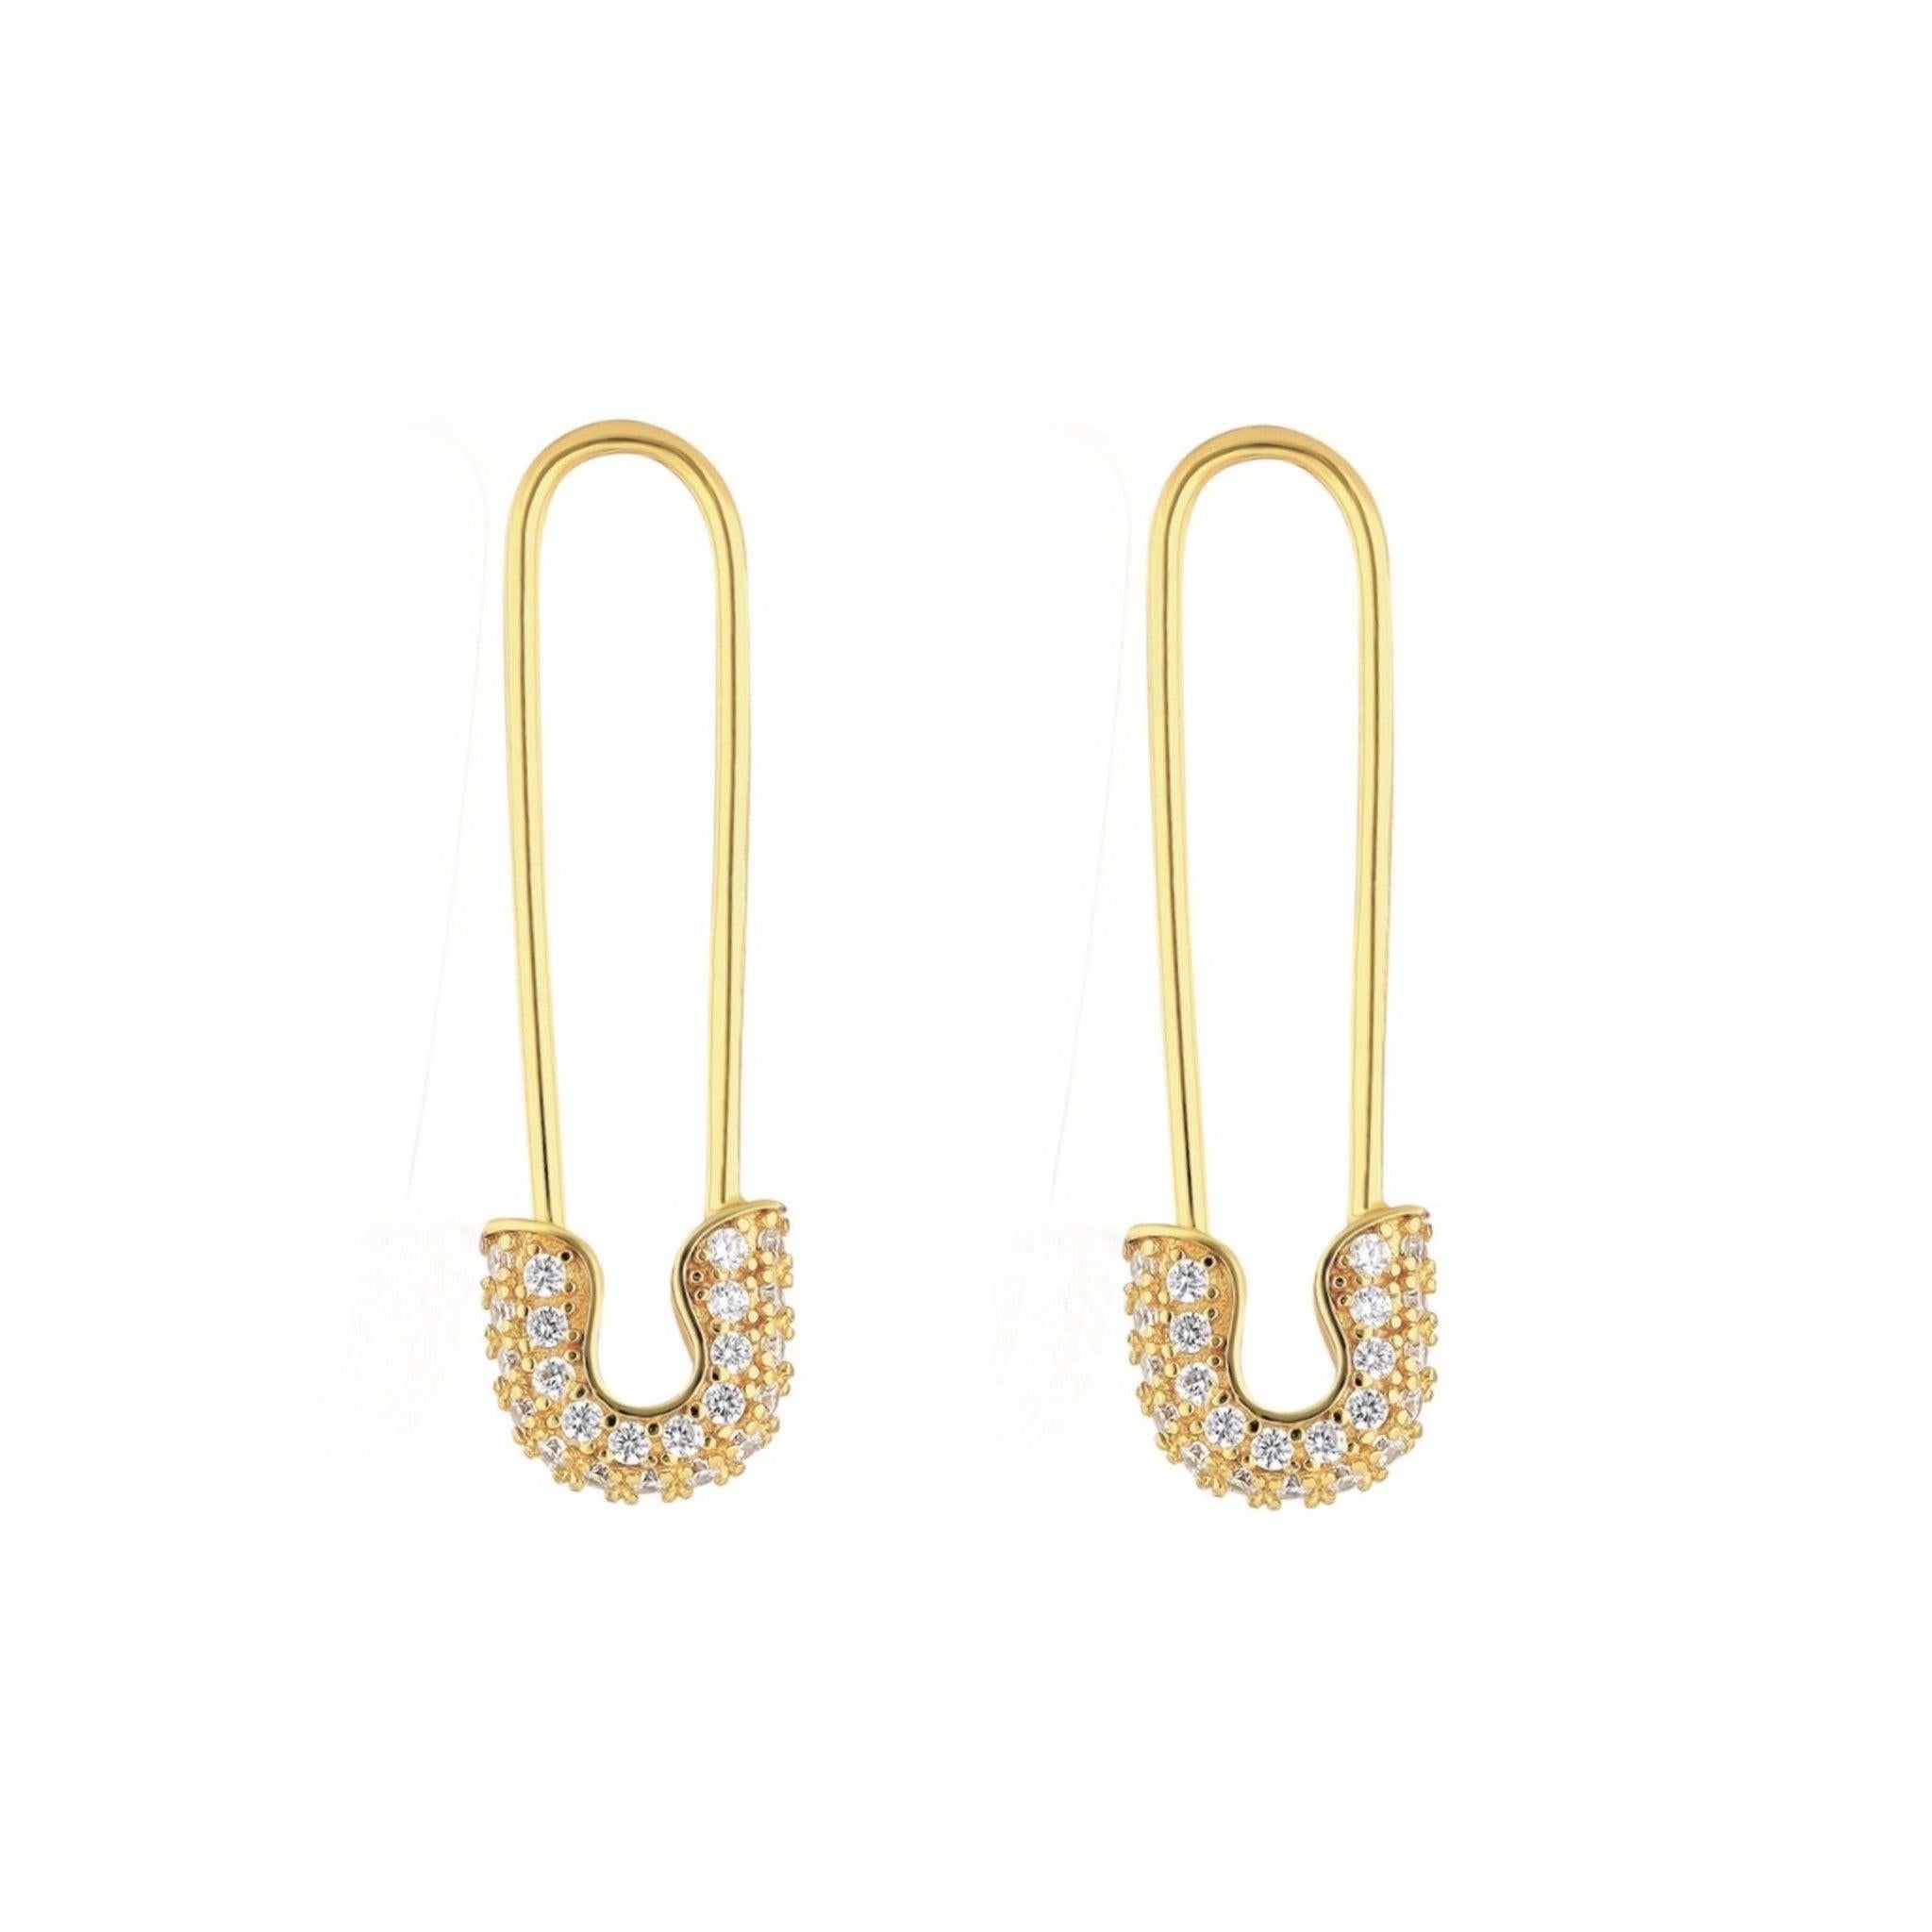 Sophia's Gold Safety Pin Earring In New Condition For Sale In Los Angeles, CA